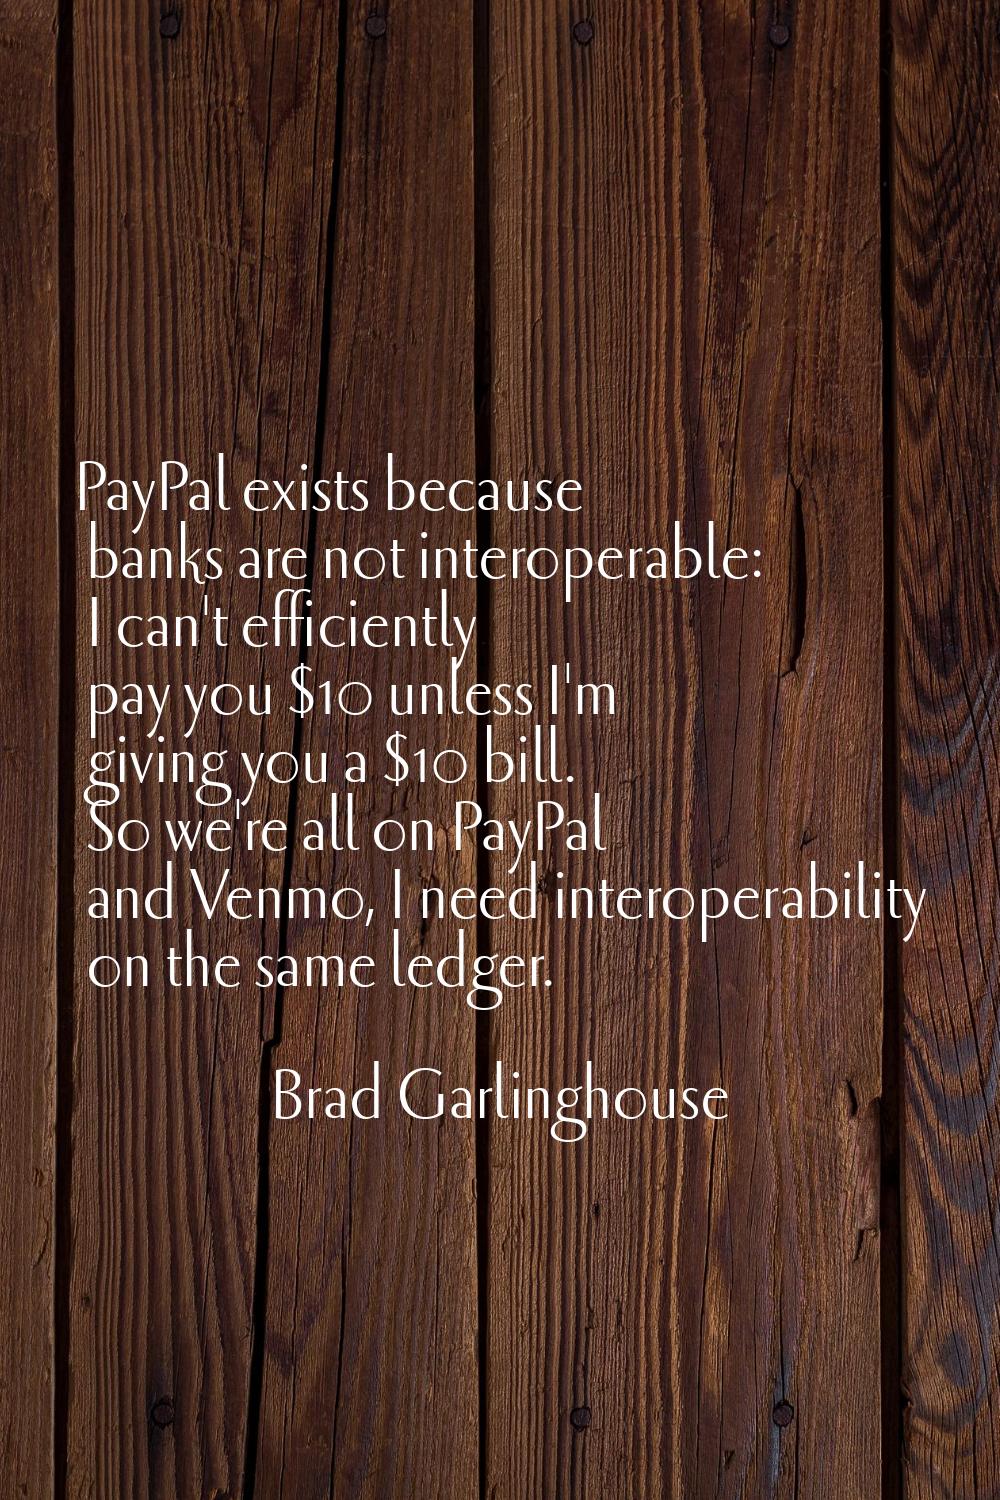 PayPal exists because banks are not interoperable: I can't efficiently pay you $10 unless I'm givin